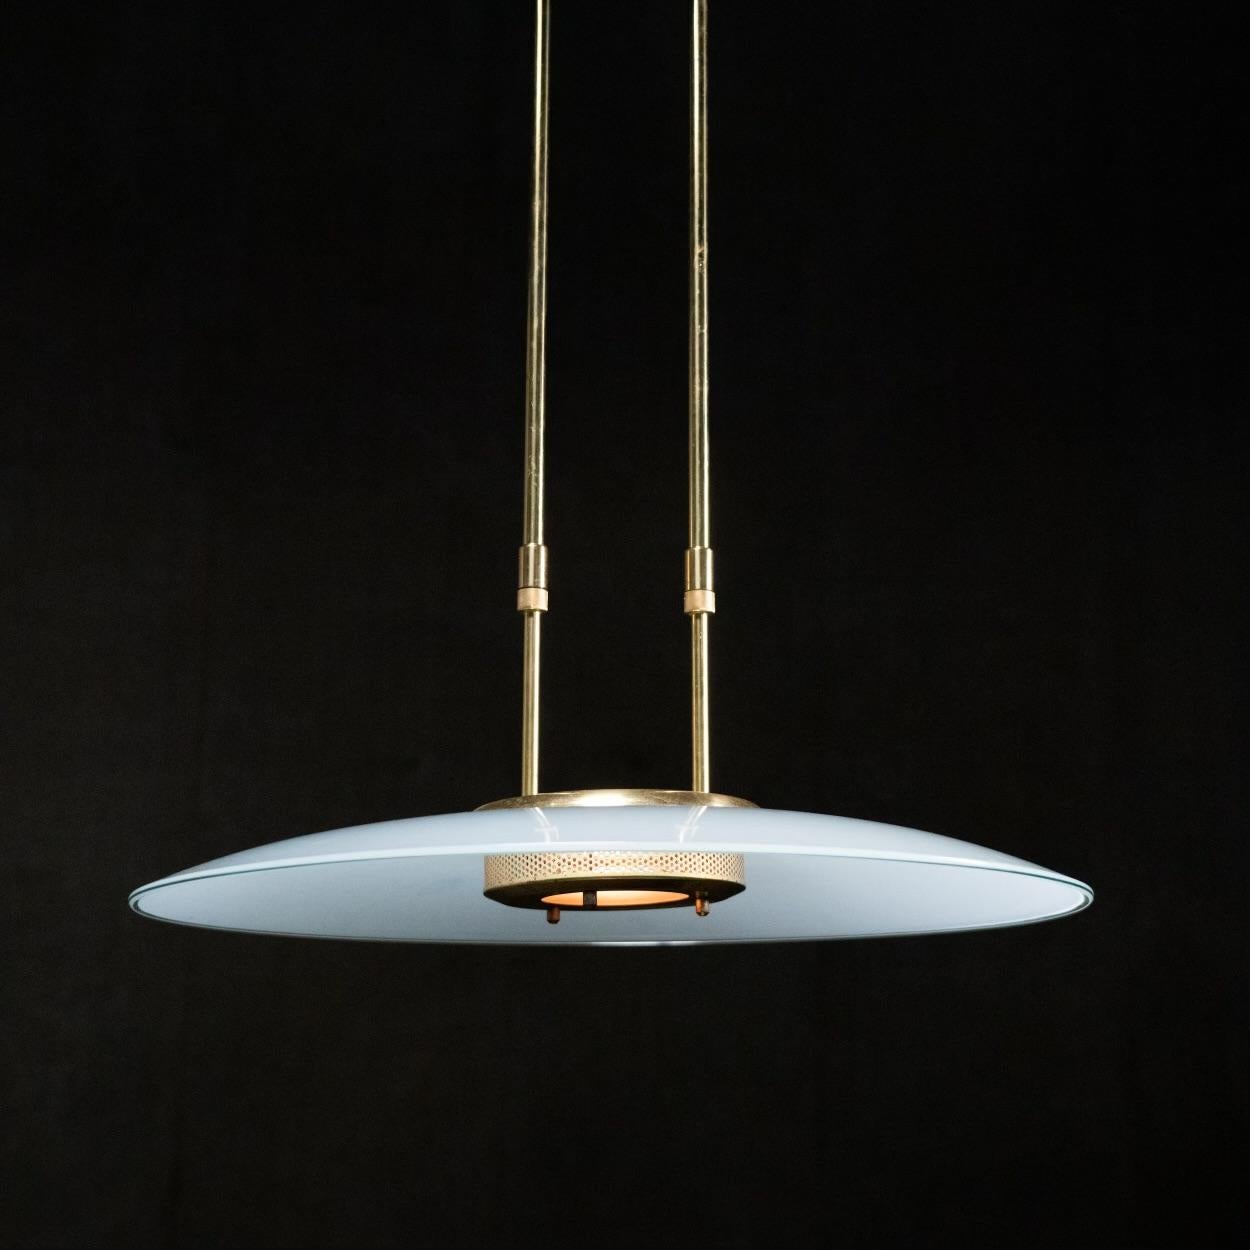 Two very unique pendants with large milk glass shade modern details with twin adjustable piping for extension or height adjustment ... movement is 28-42 with ceiling mounting plate in place..

Found in italy ..rewired and fully functional ..PRICE